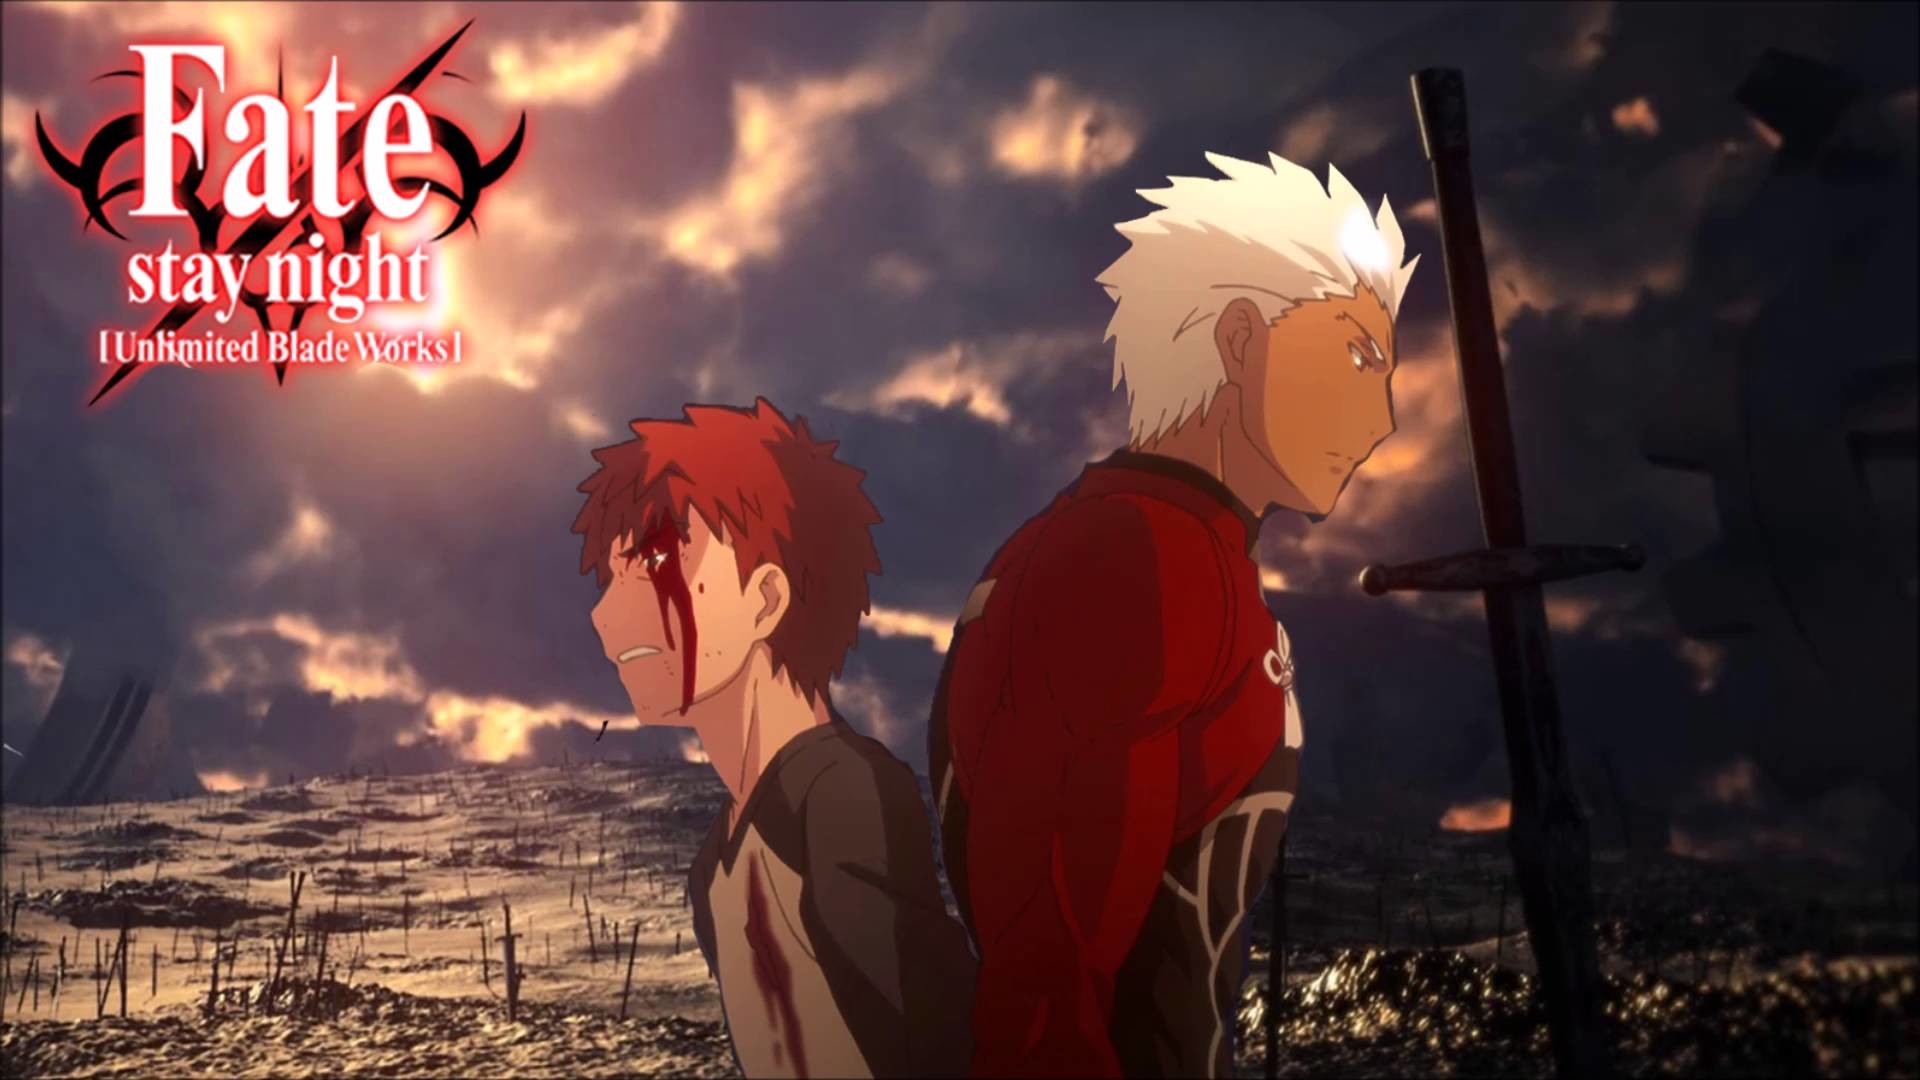 Ringtone Aimer Brave Shine Fate / Stay Night Unlimited Blade Works – YouTube